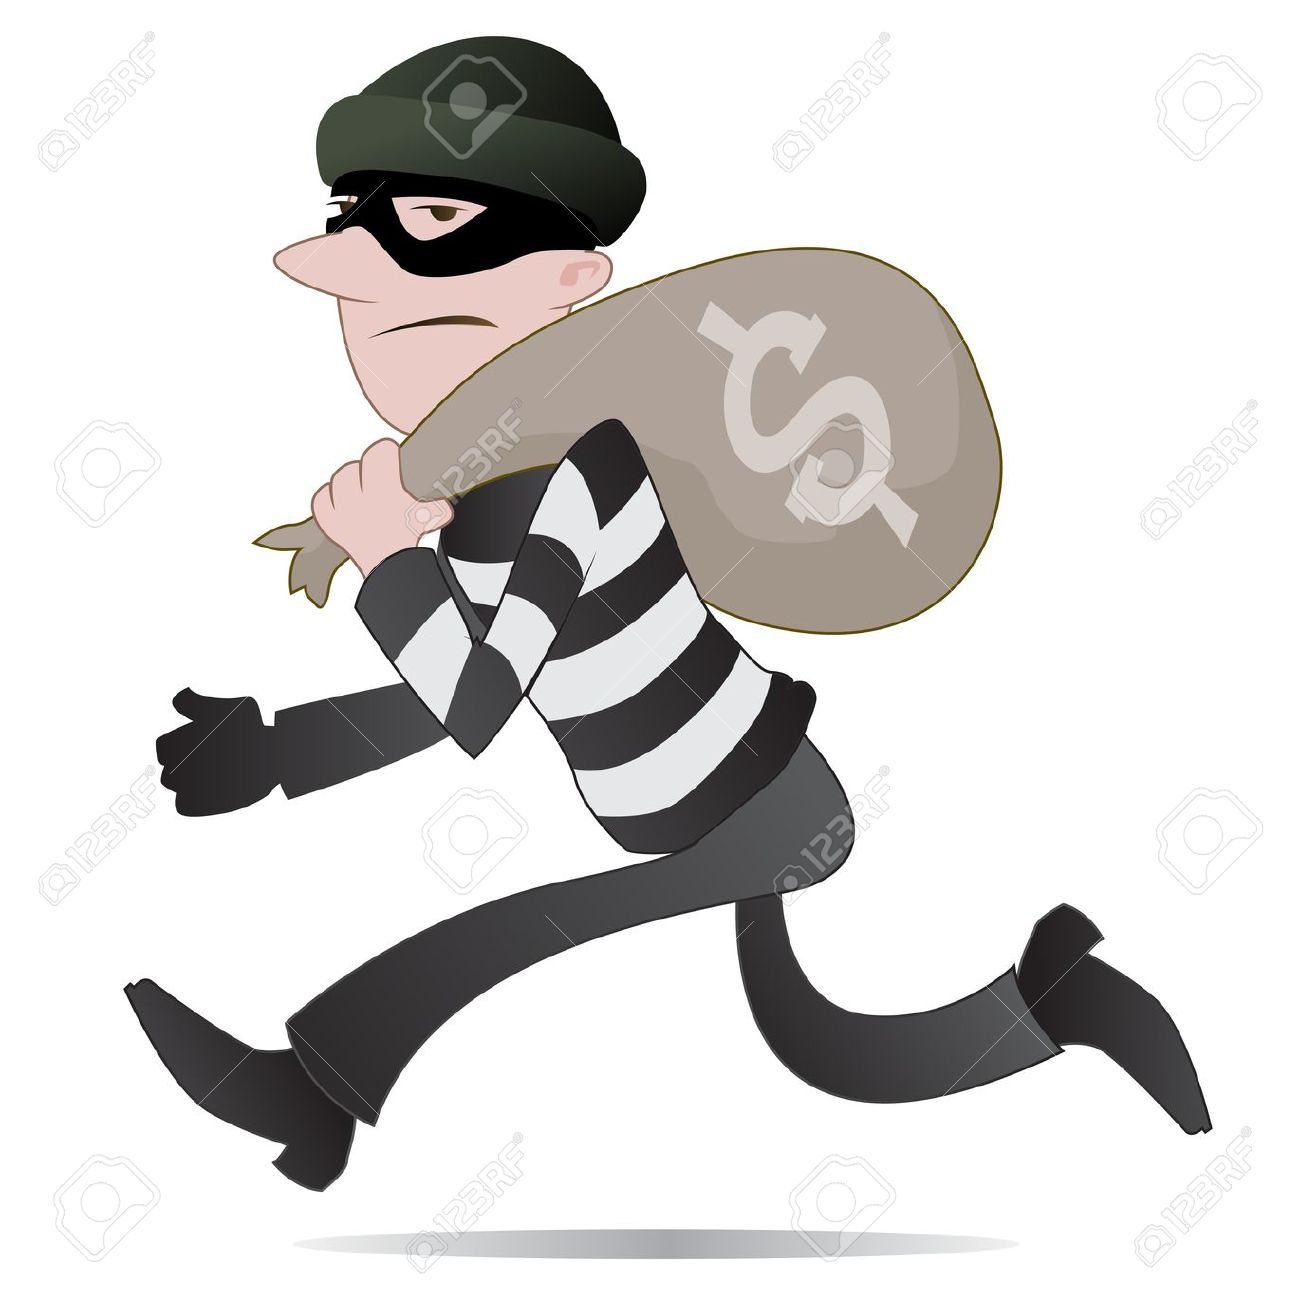 Robber thief clipart free dow